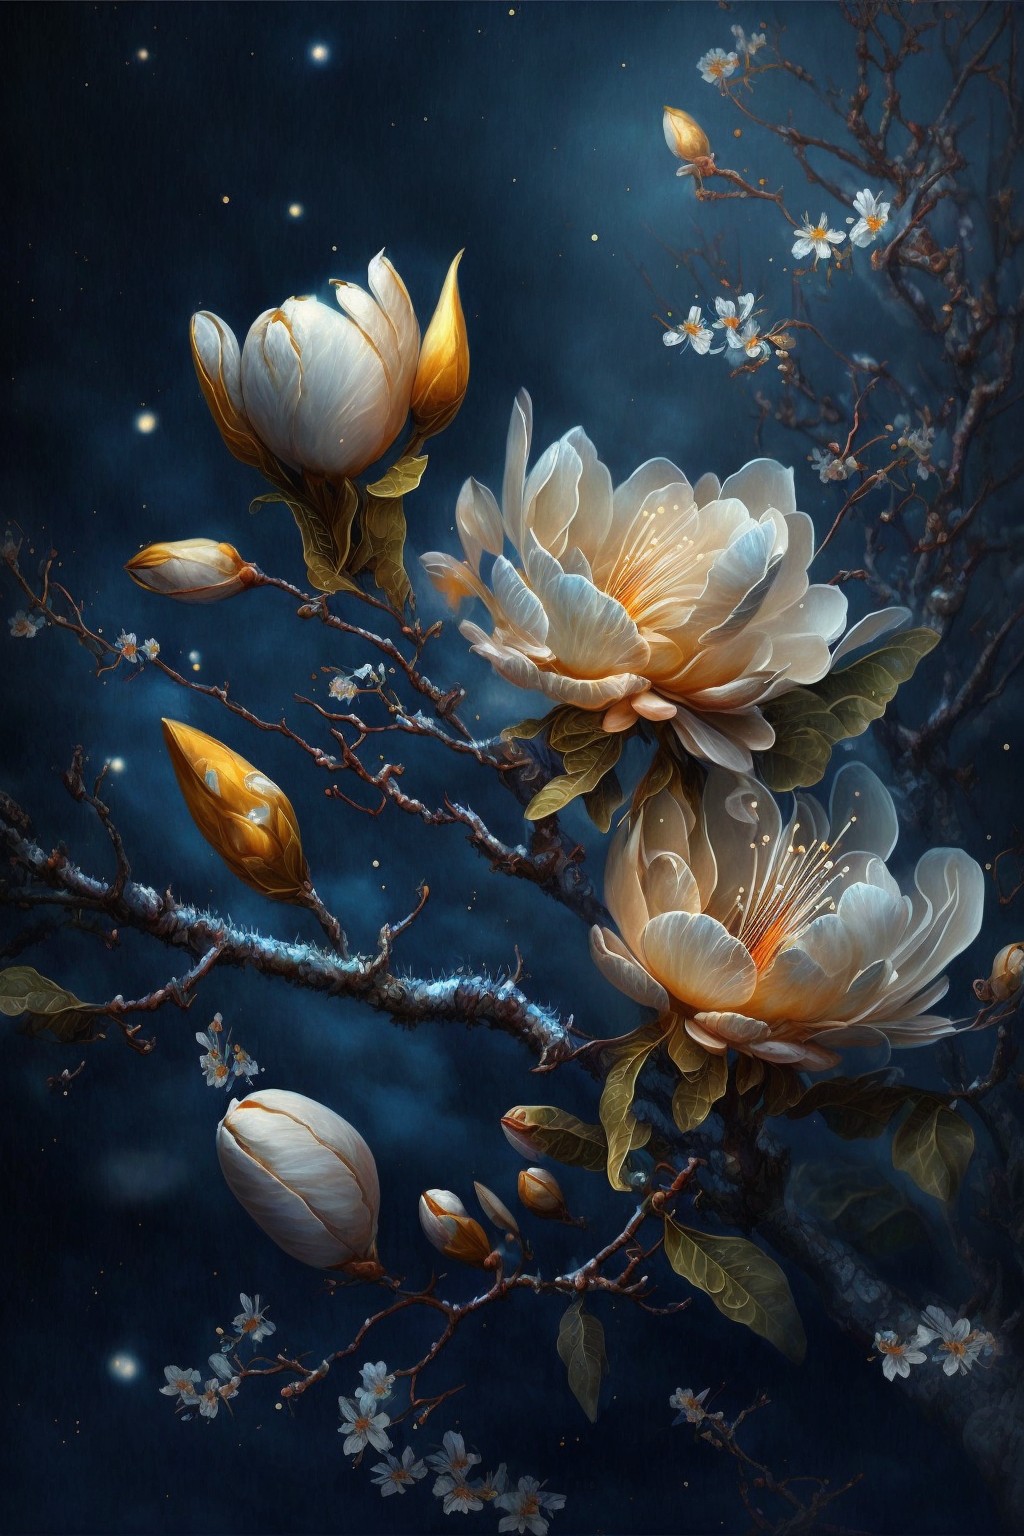 4 images of magnolia blooming at night by Midjourney